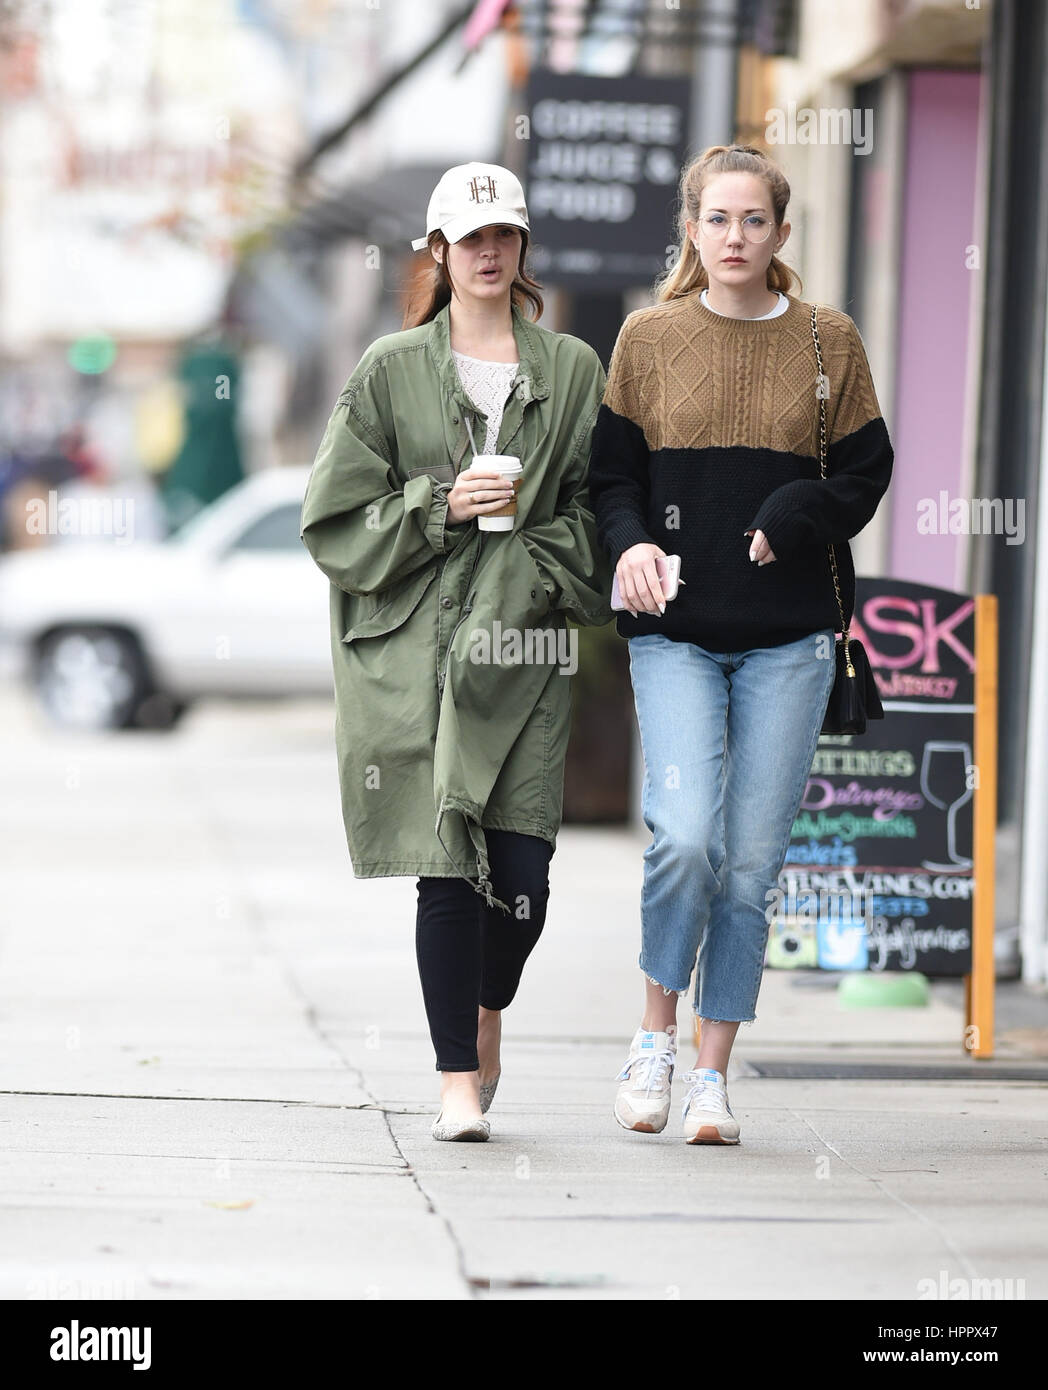 Lana Del Rey out shopping with friends Featuring: Lana Del Rey Where: Los  Angeles, California, United States When: 23 Jan 2017 Credit: WENN.com Stock  Photo - Alamy